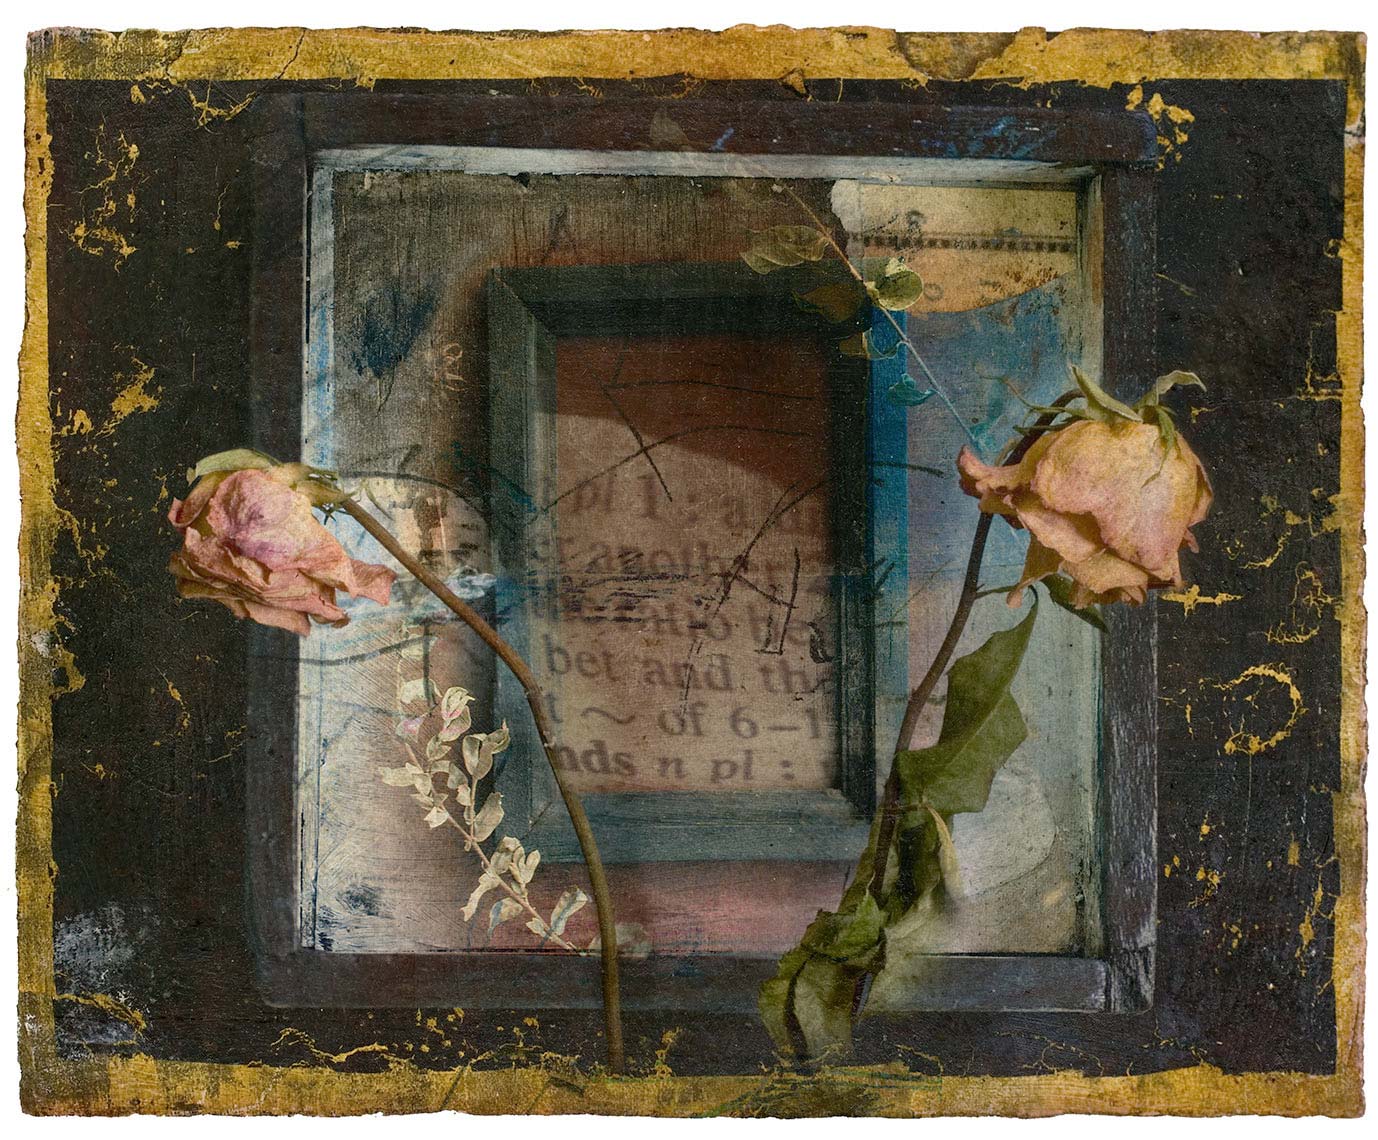 Still life of two wilted roses against background of weathered wood picture frame and painted background with nicks and scratch marks